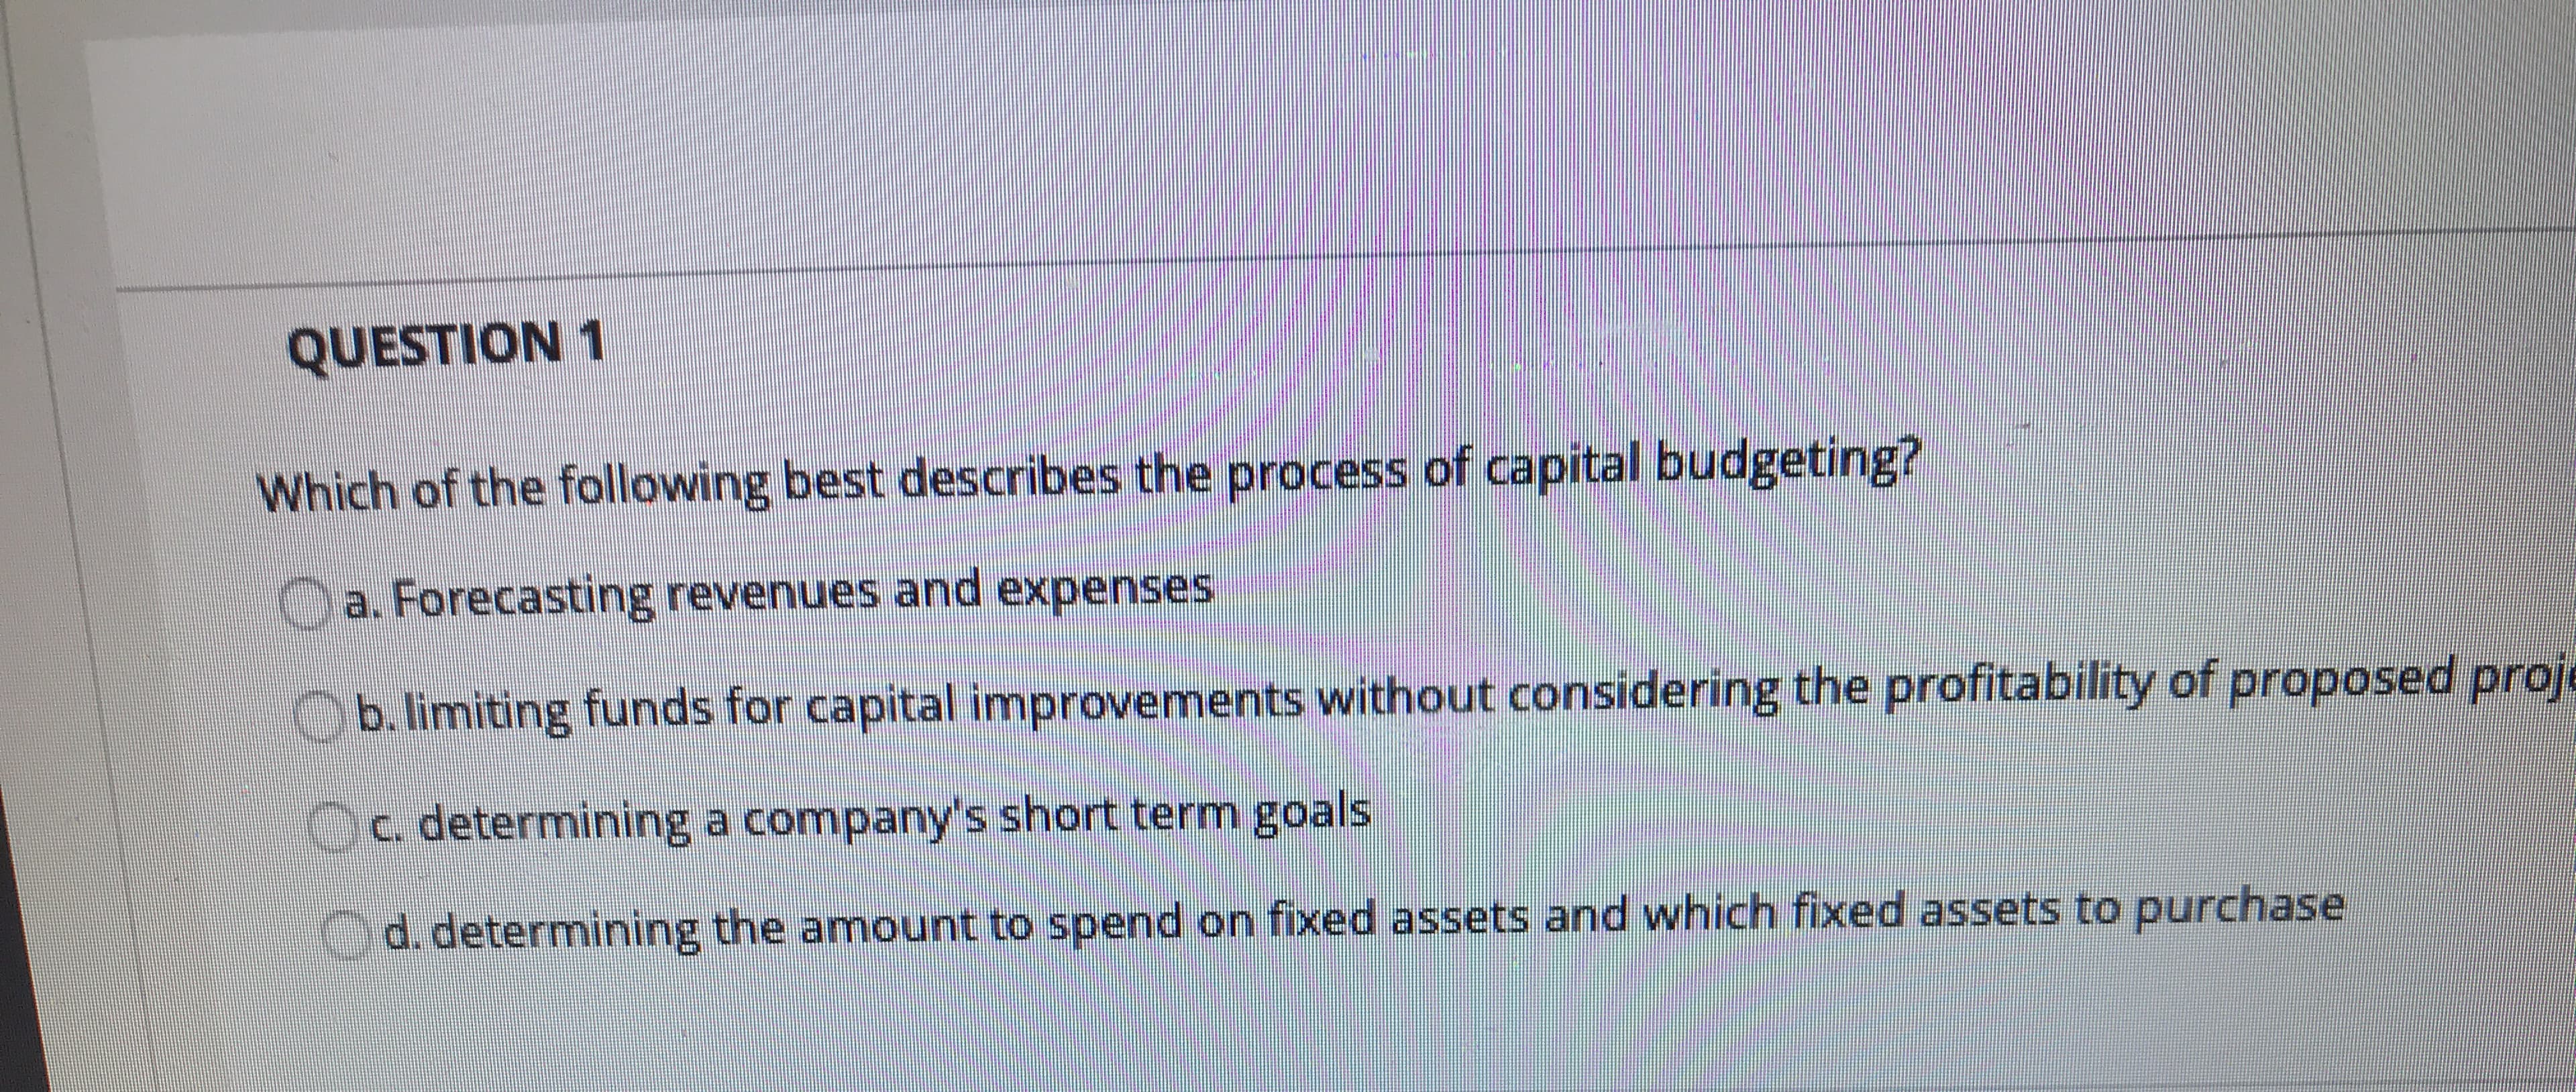 Which of the following best describes the process of capital budgeting?
a Forecasting revenues and expenses
hmiting funds for capital improvements without considering the profitability of proposed prot
determining a companys short term goals
d. determinung the amount to spend on fixed assets and which fixed assets to purchase
